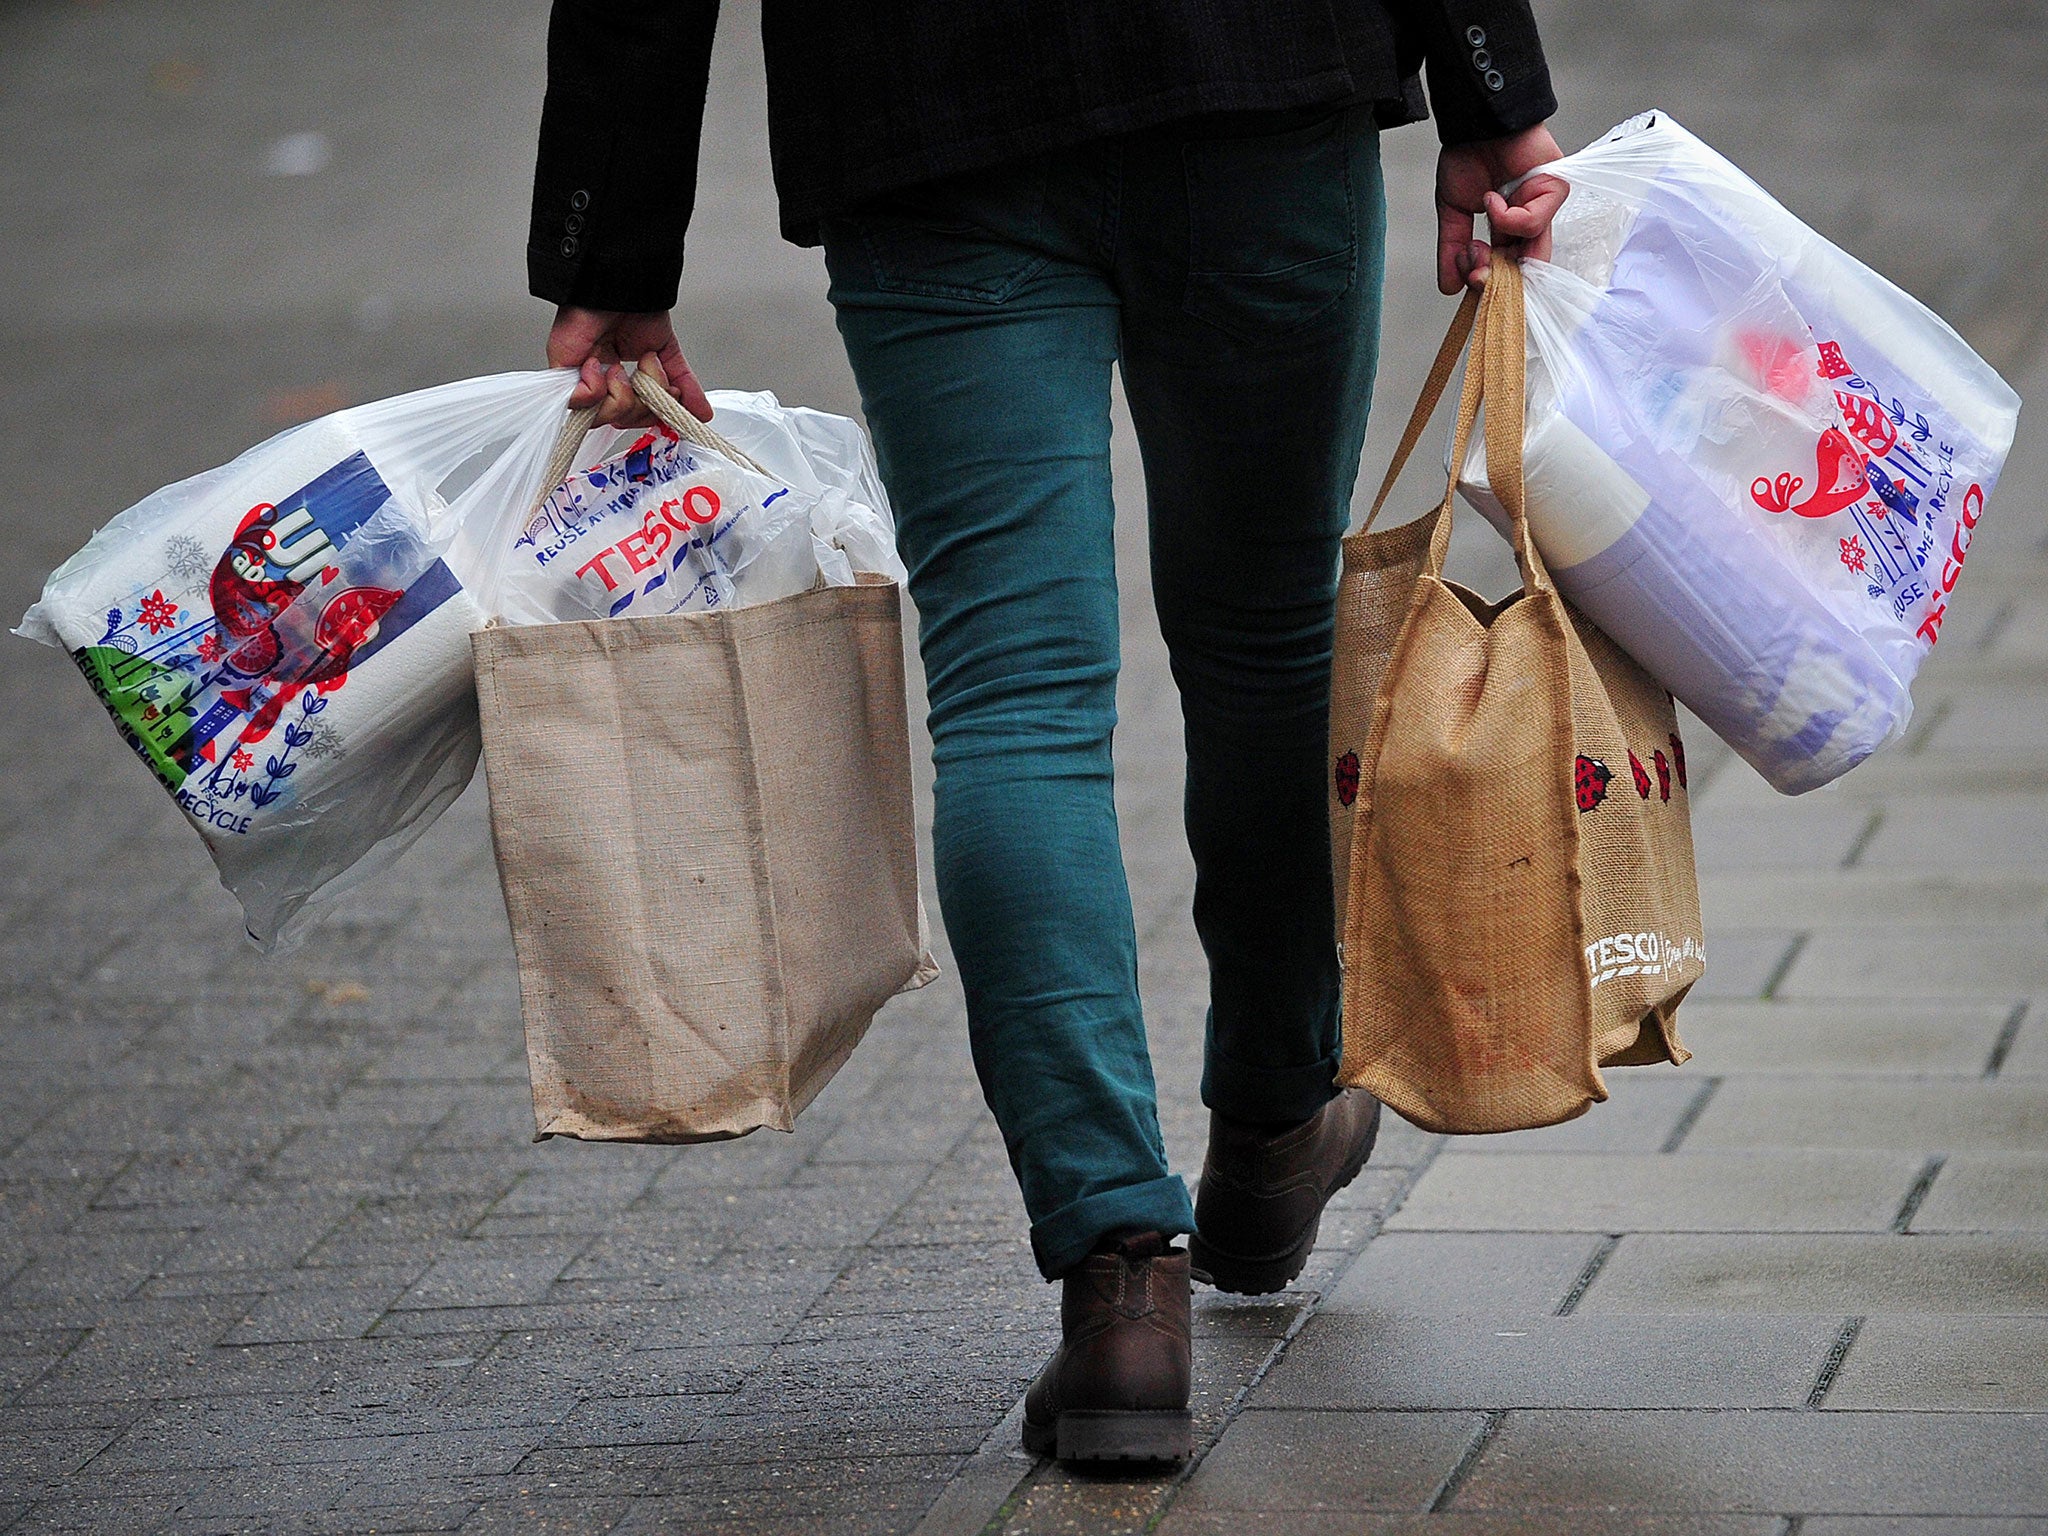 Supermarkets agree to keep the same prices nationally